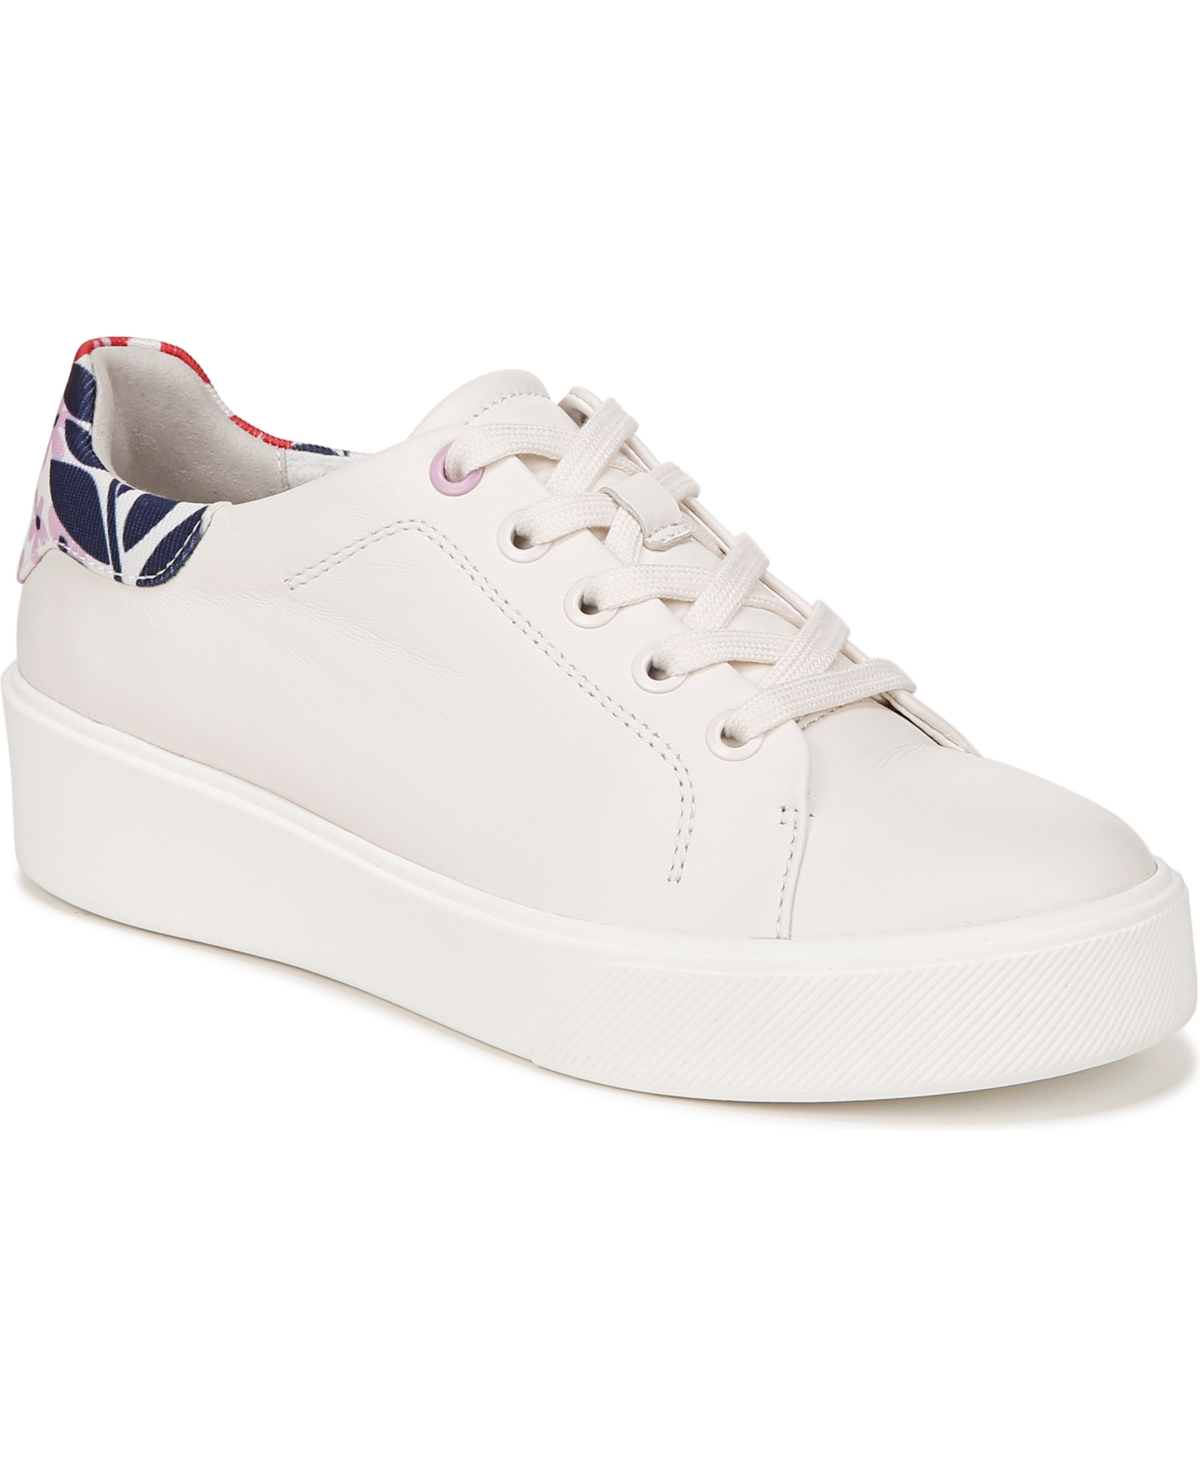 Morrison 2.0 Sneakers - Warm White/Lilac Floral Leather/Fabric